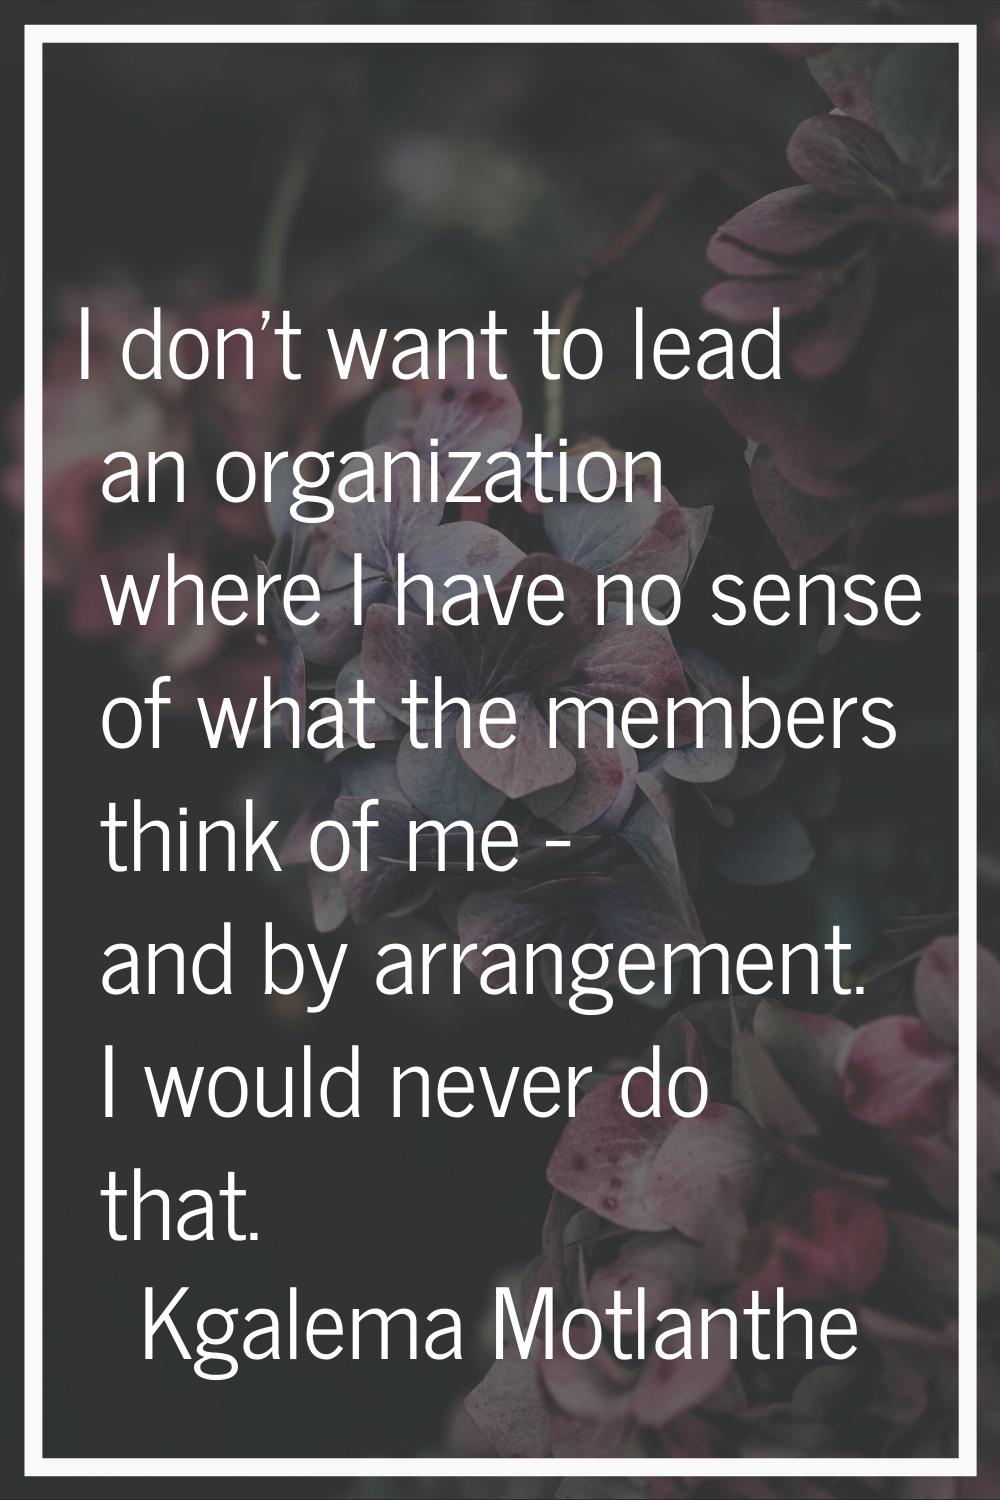 I don't want to lead an organization where I have no sense of what the members think of me - and by